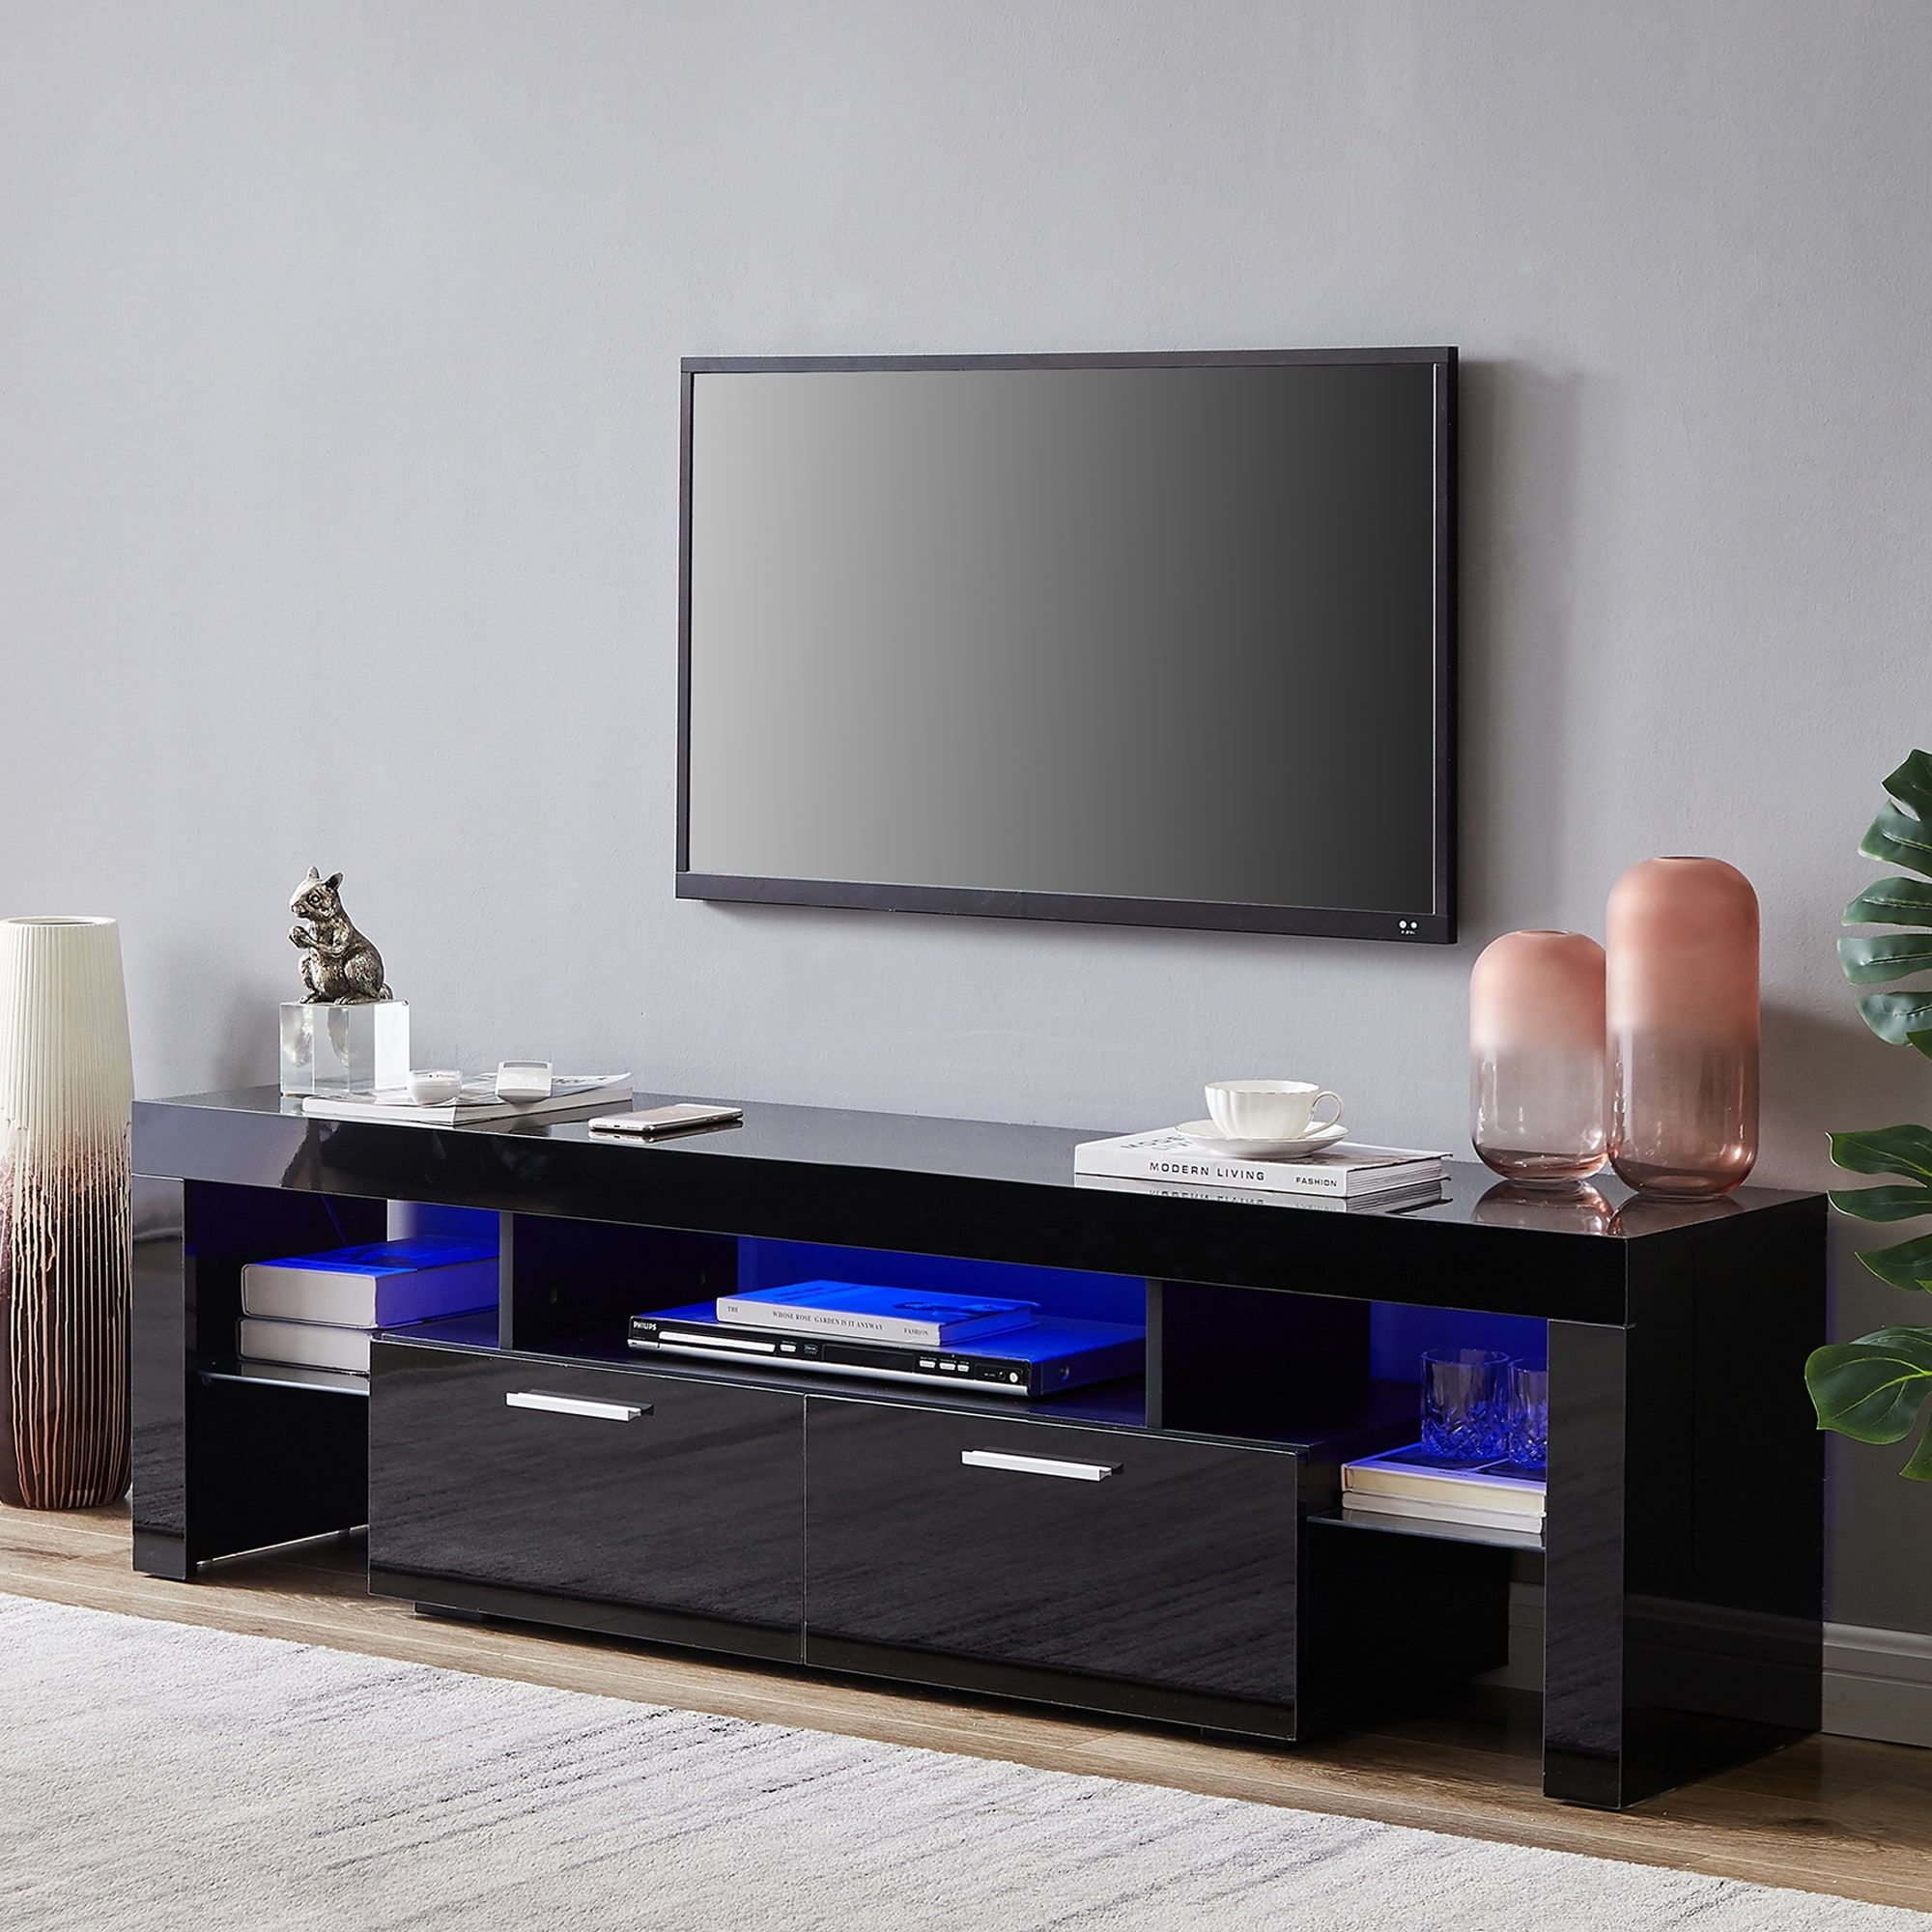 63 Inch Rgb Led Light High Glossy Tv Stand Cabinet With 2 Center Down Open  Tie Rod Big Storage Drawer And 2 Side Glass Shelf – Bed Bath & Beyond –  35473038 Within Rgb Tv Entertainment Centers (View 3 of 15)